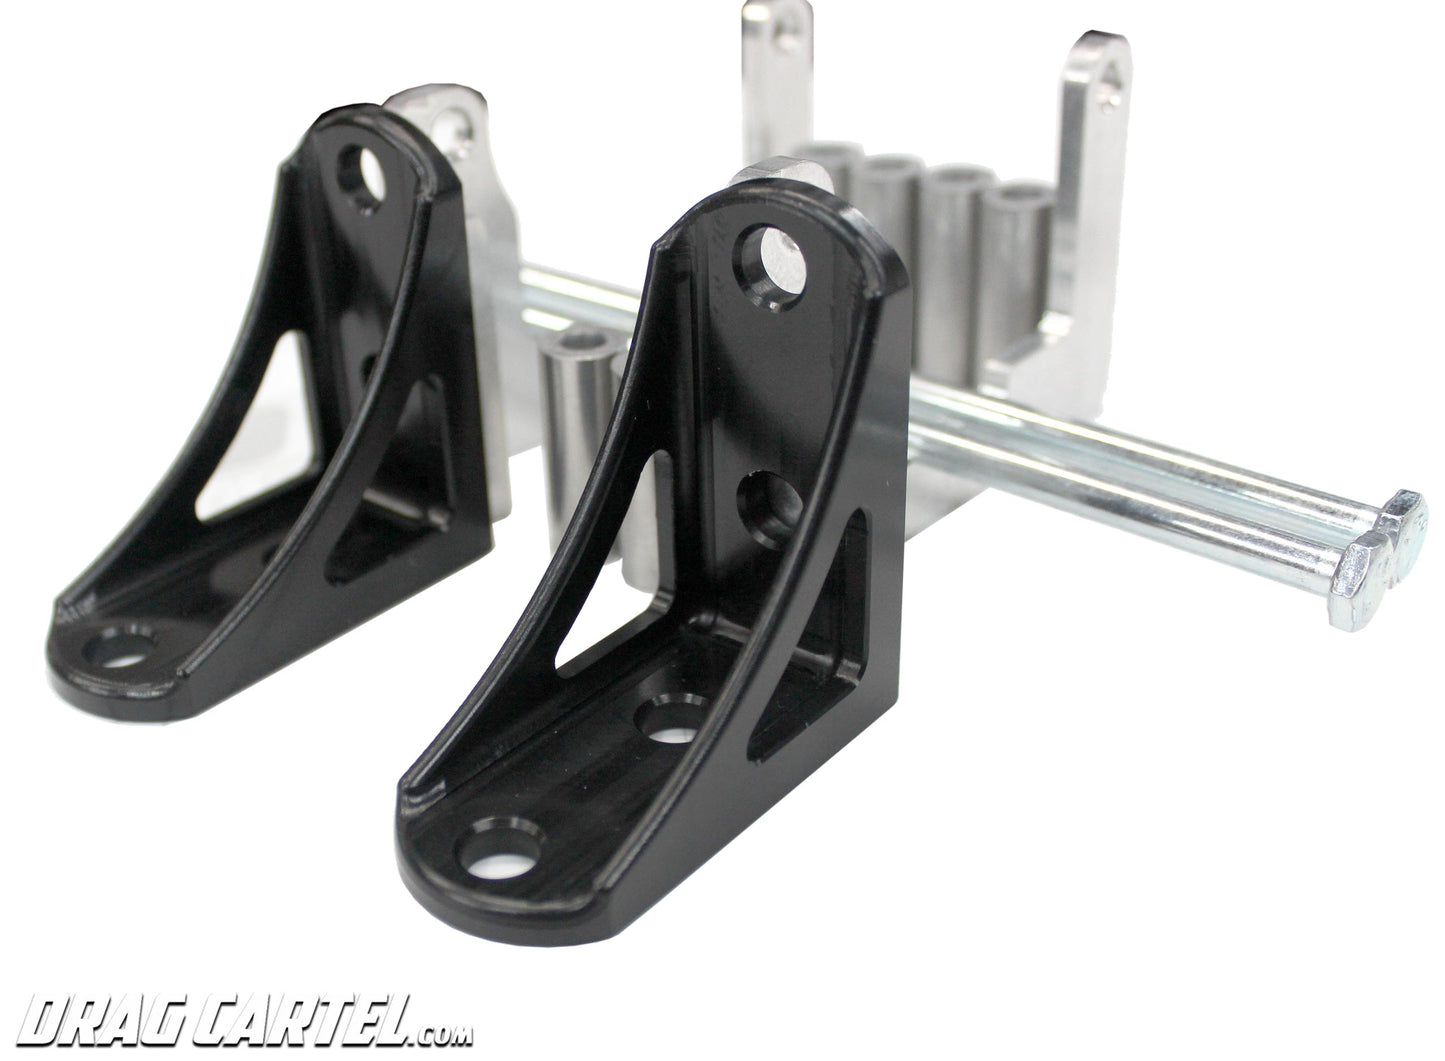 Drag Cartel - Smart Coil Relocation Mounting Brackets